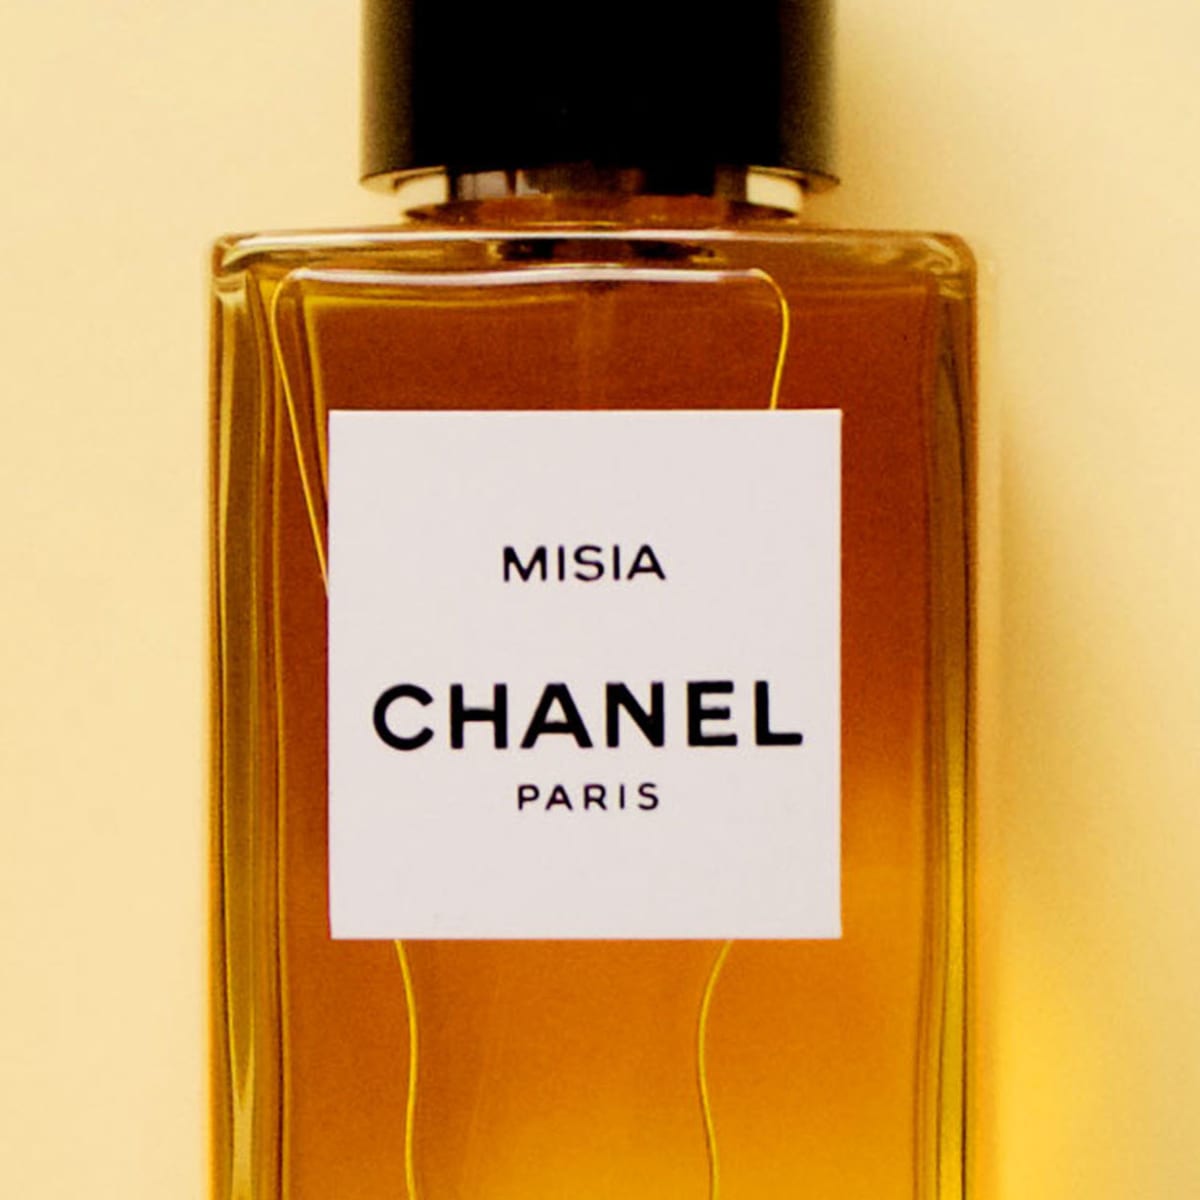 Chanel Misia Review - The Skincare Edit